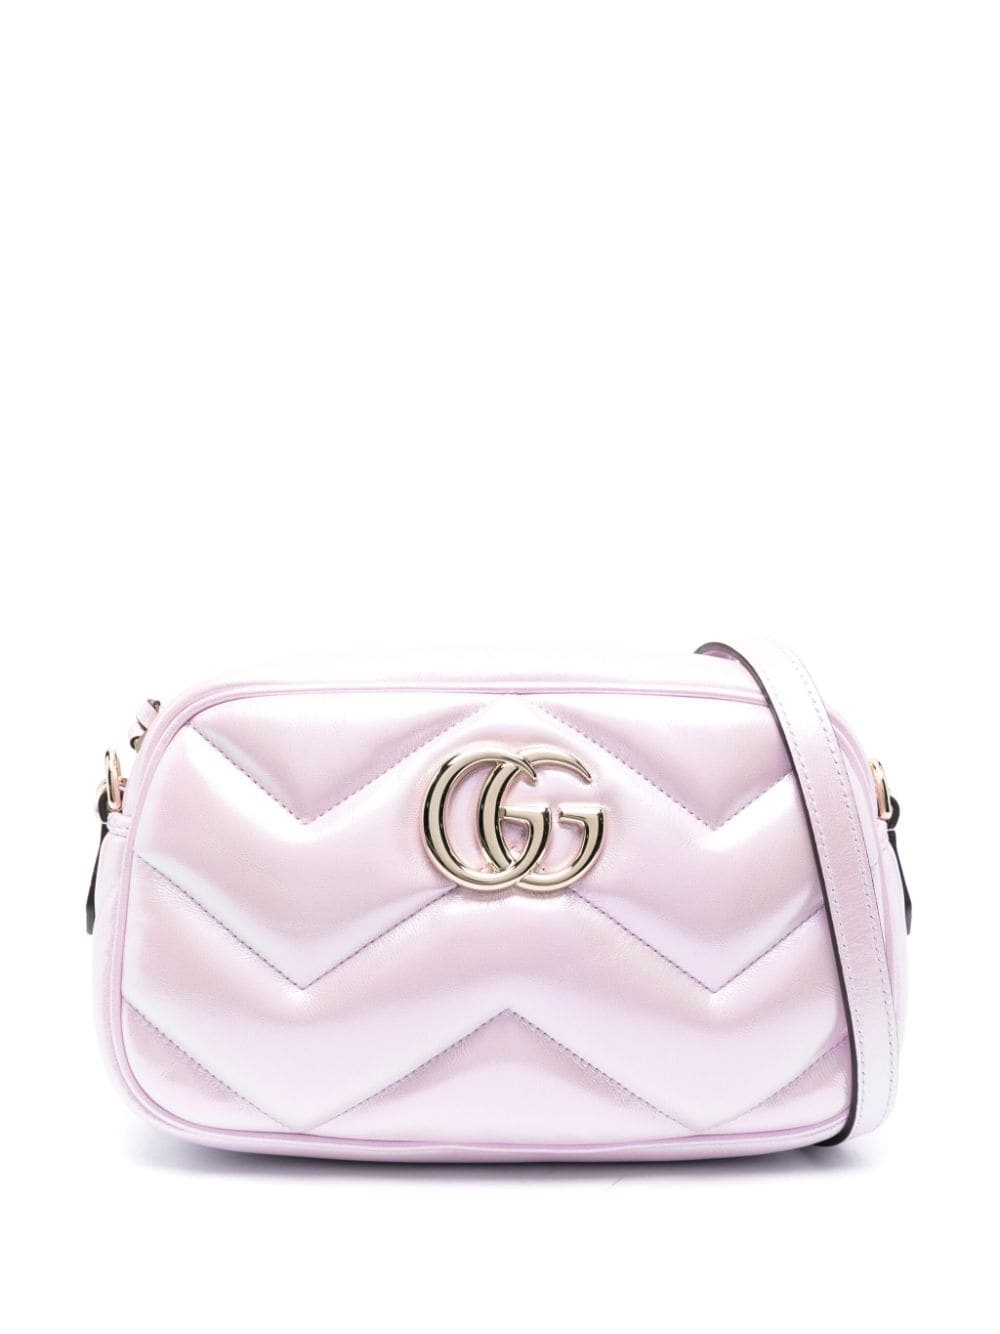 Gg marmont small leather shoulder bag - 1